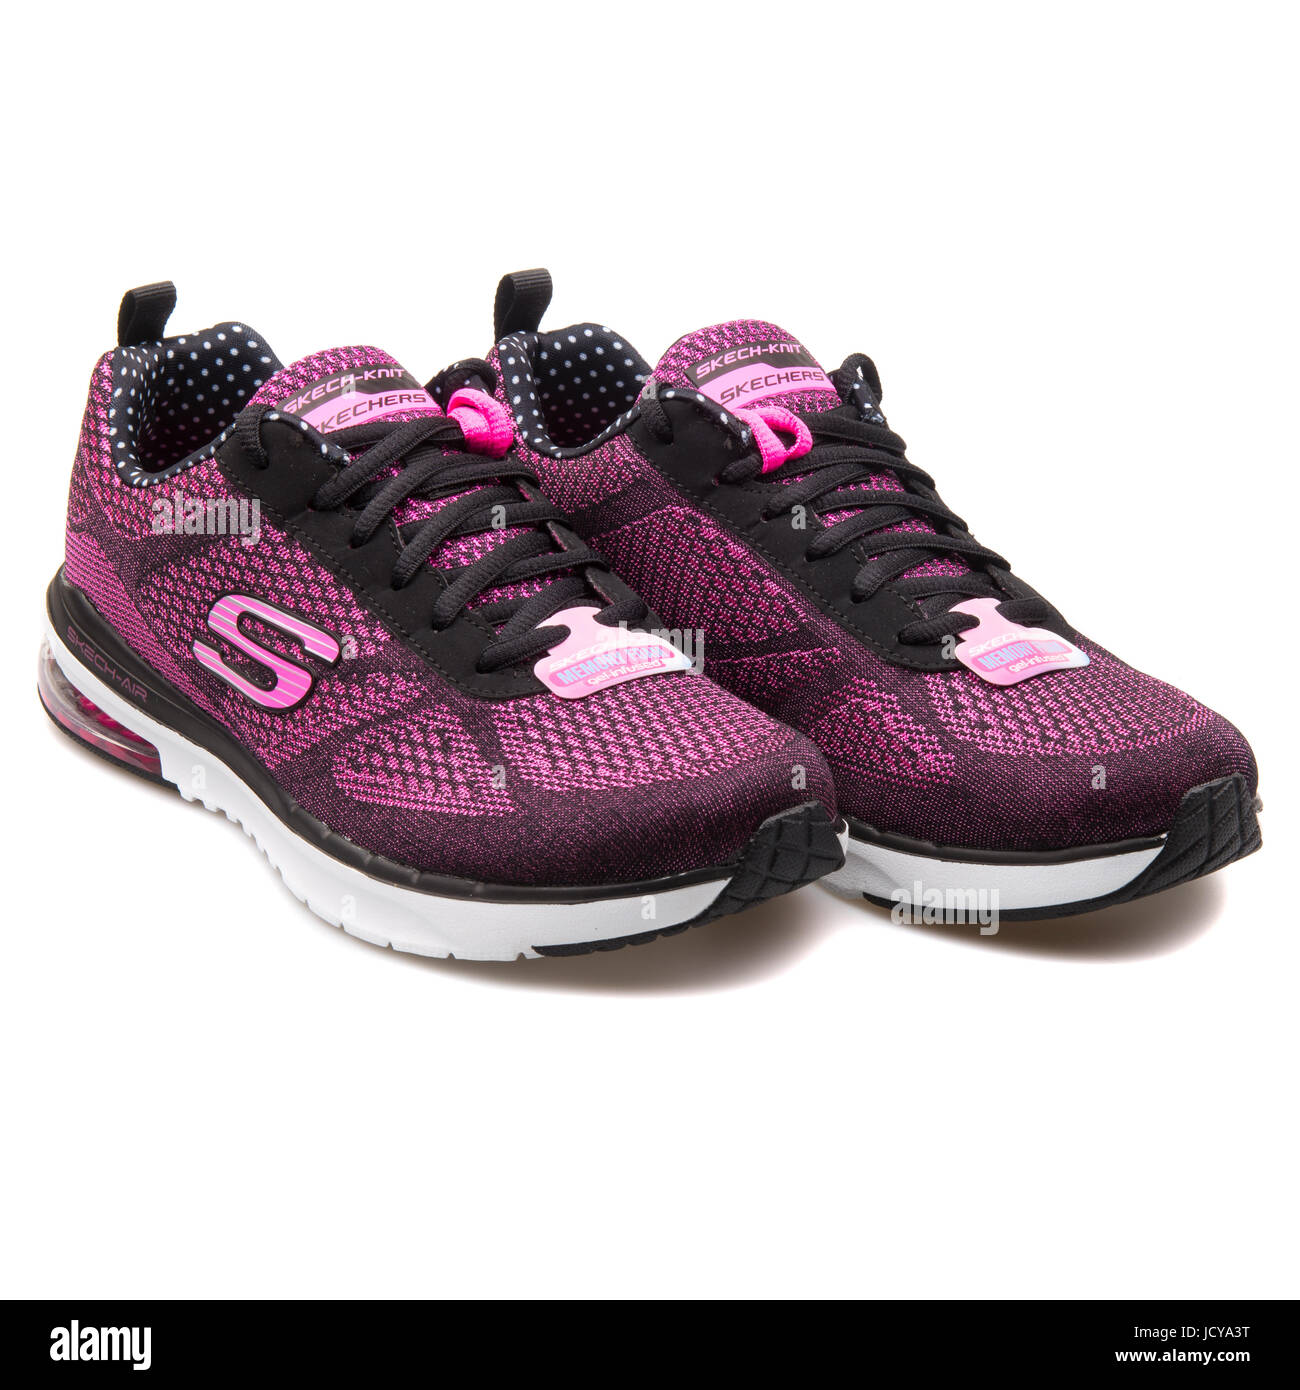 Skechers Infinity Black and Hot Pink Women's Shoes 12111-BKHP Stock Photo - Alamy